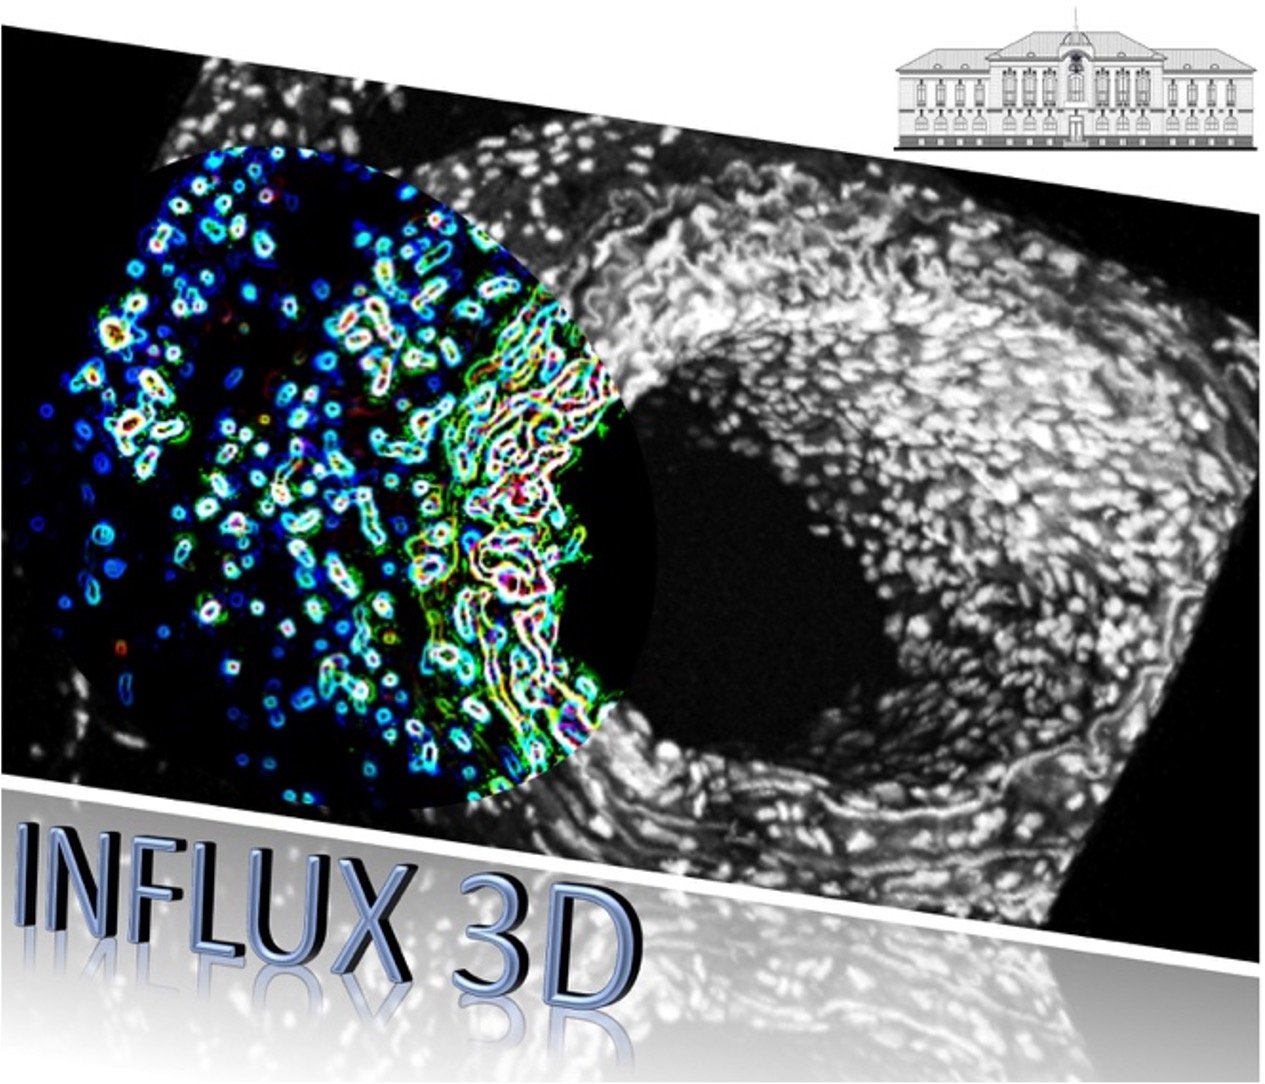 Investigation of Tissular Extracellular Matrix by Automatised 3D Tissue Reconstruction